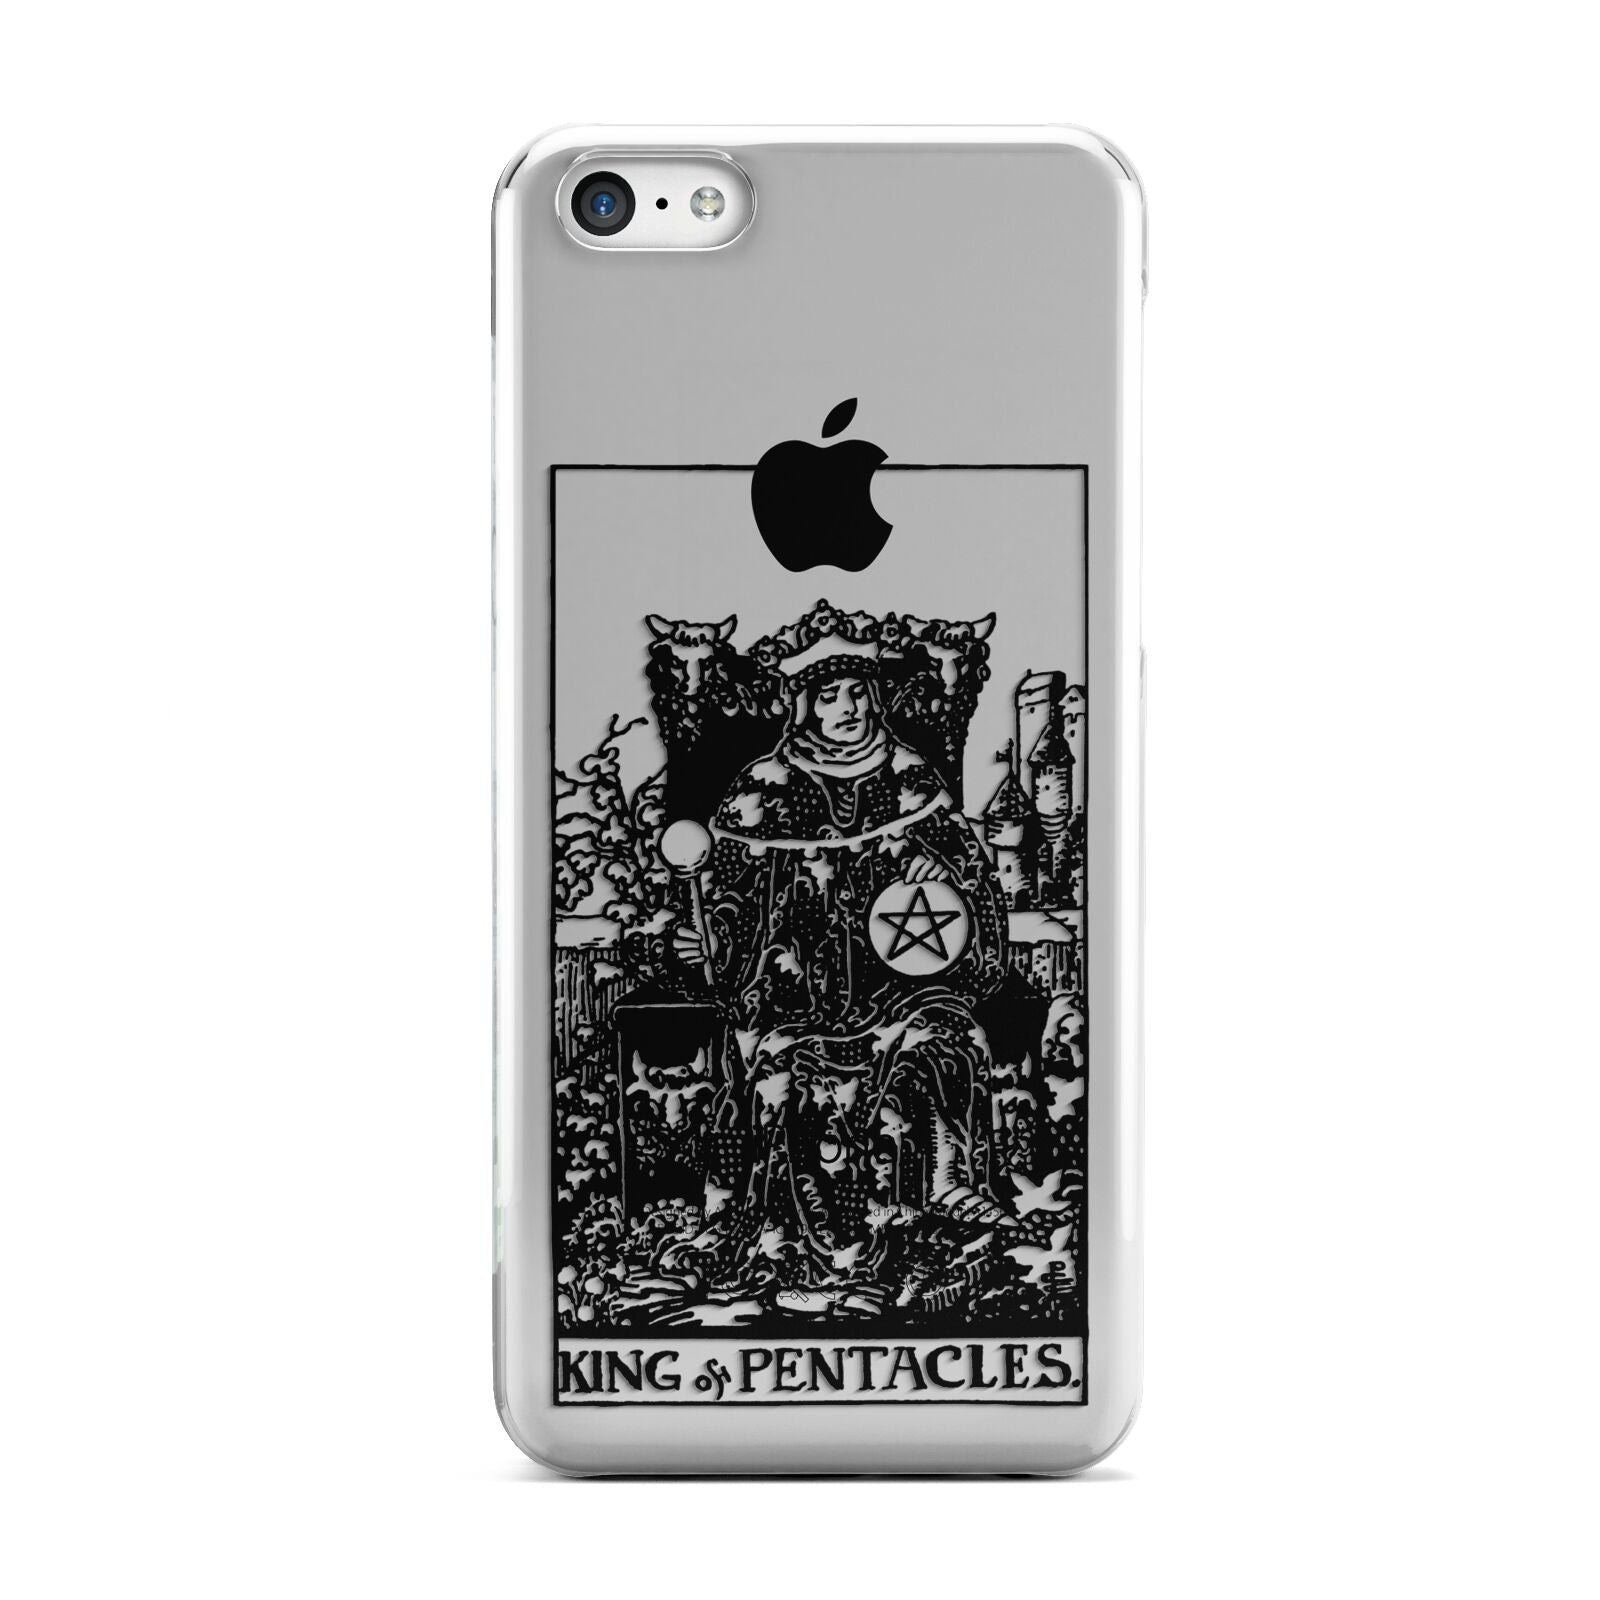 King of Pentacles Monochrome Apple iPhone 5c Case